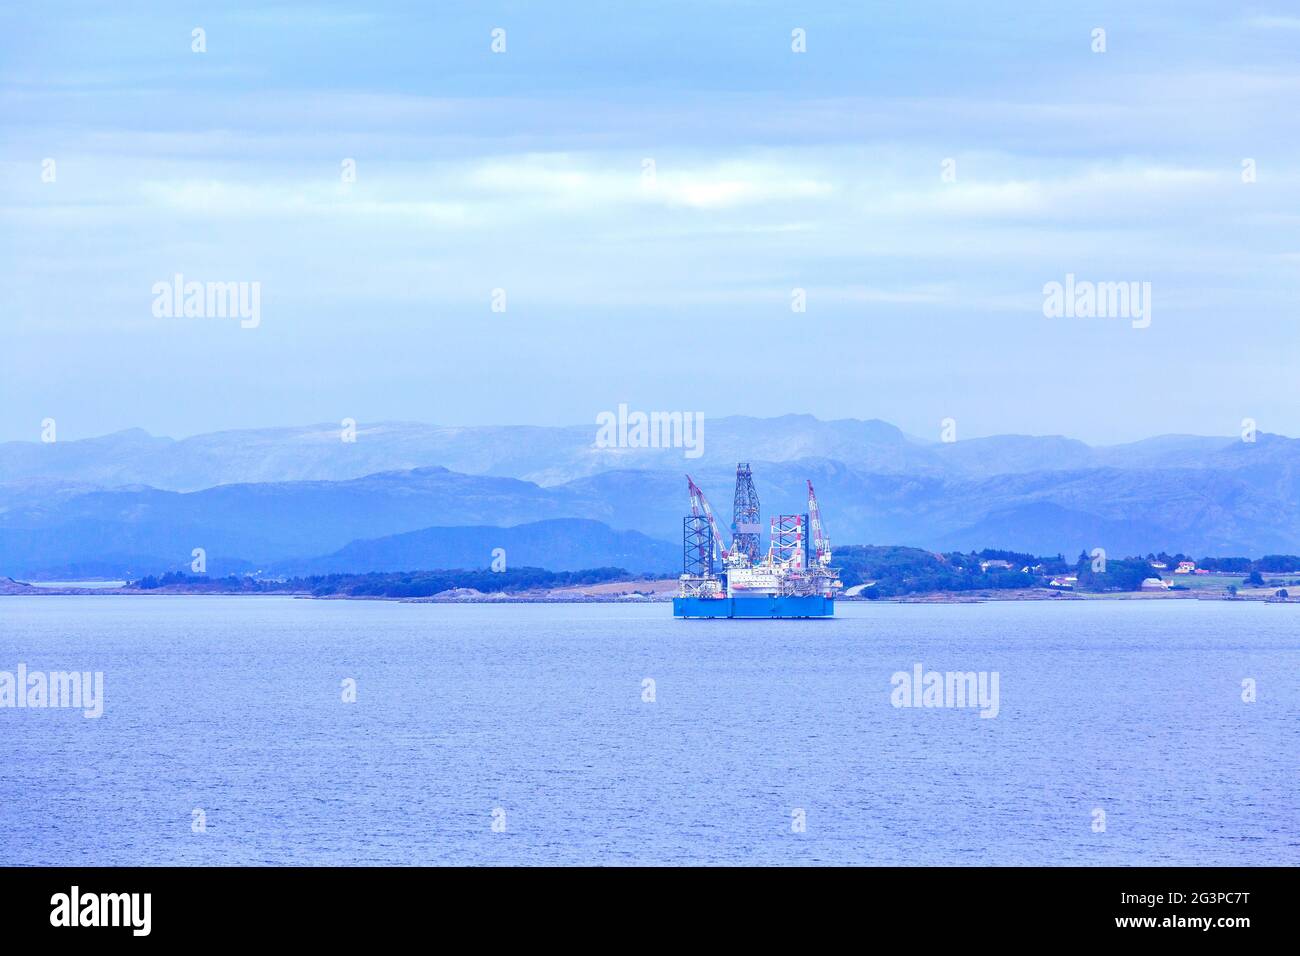 Rigs offshore Oil refinery platform in Stavanger, Norway fjord with copy space Stock Photo